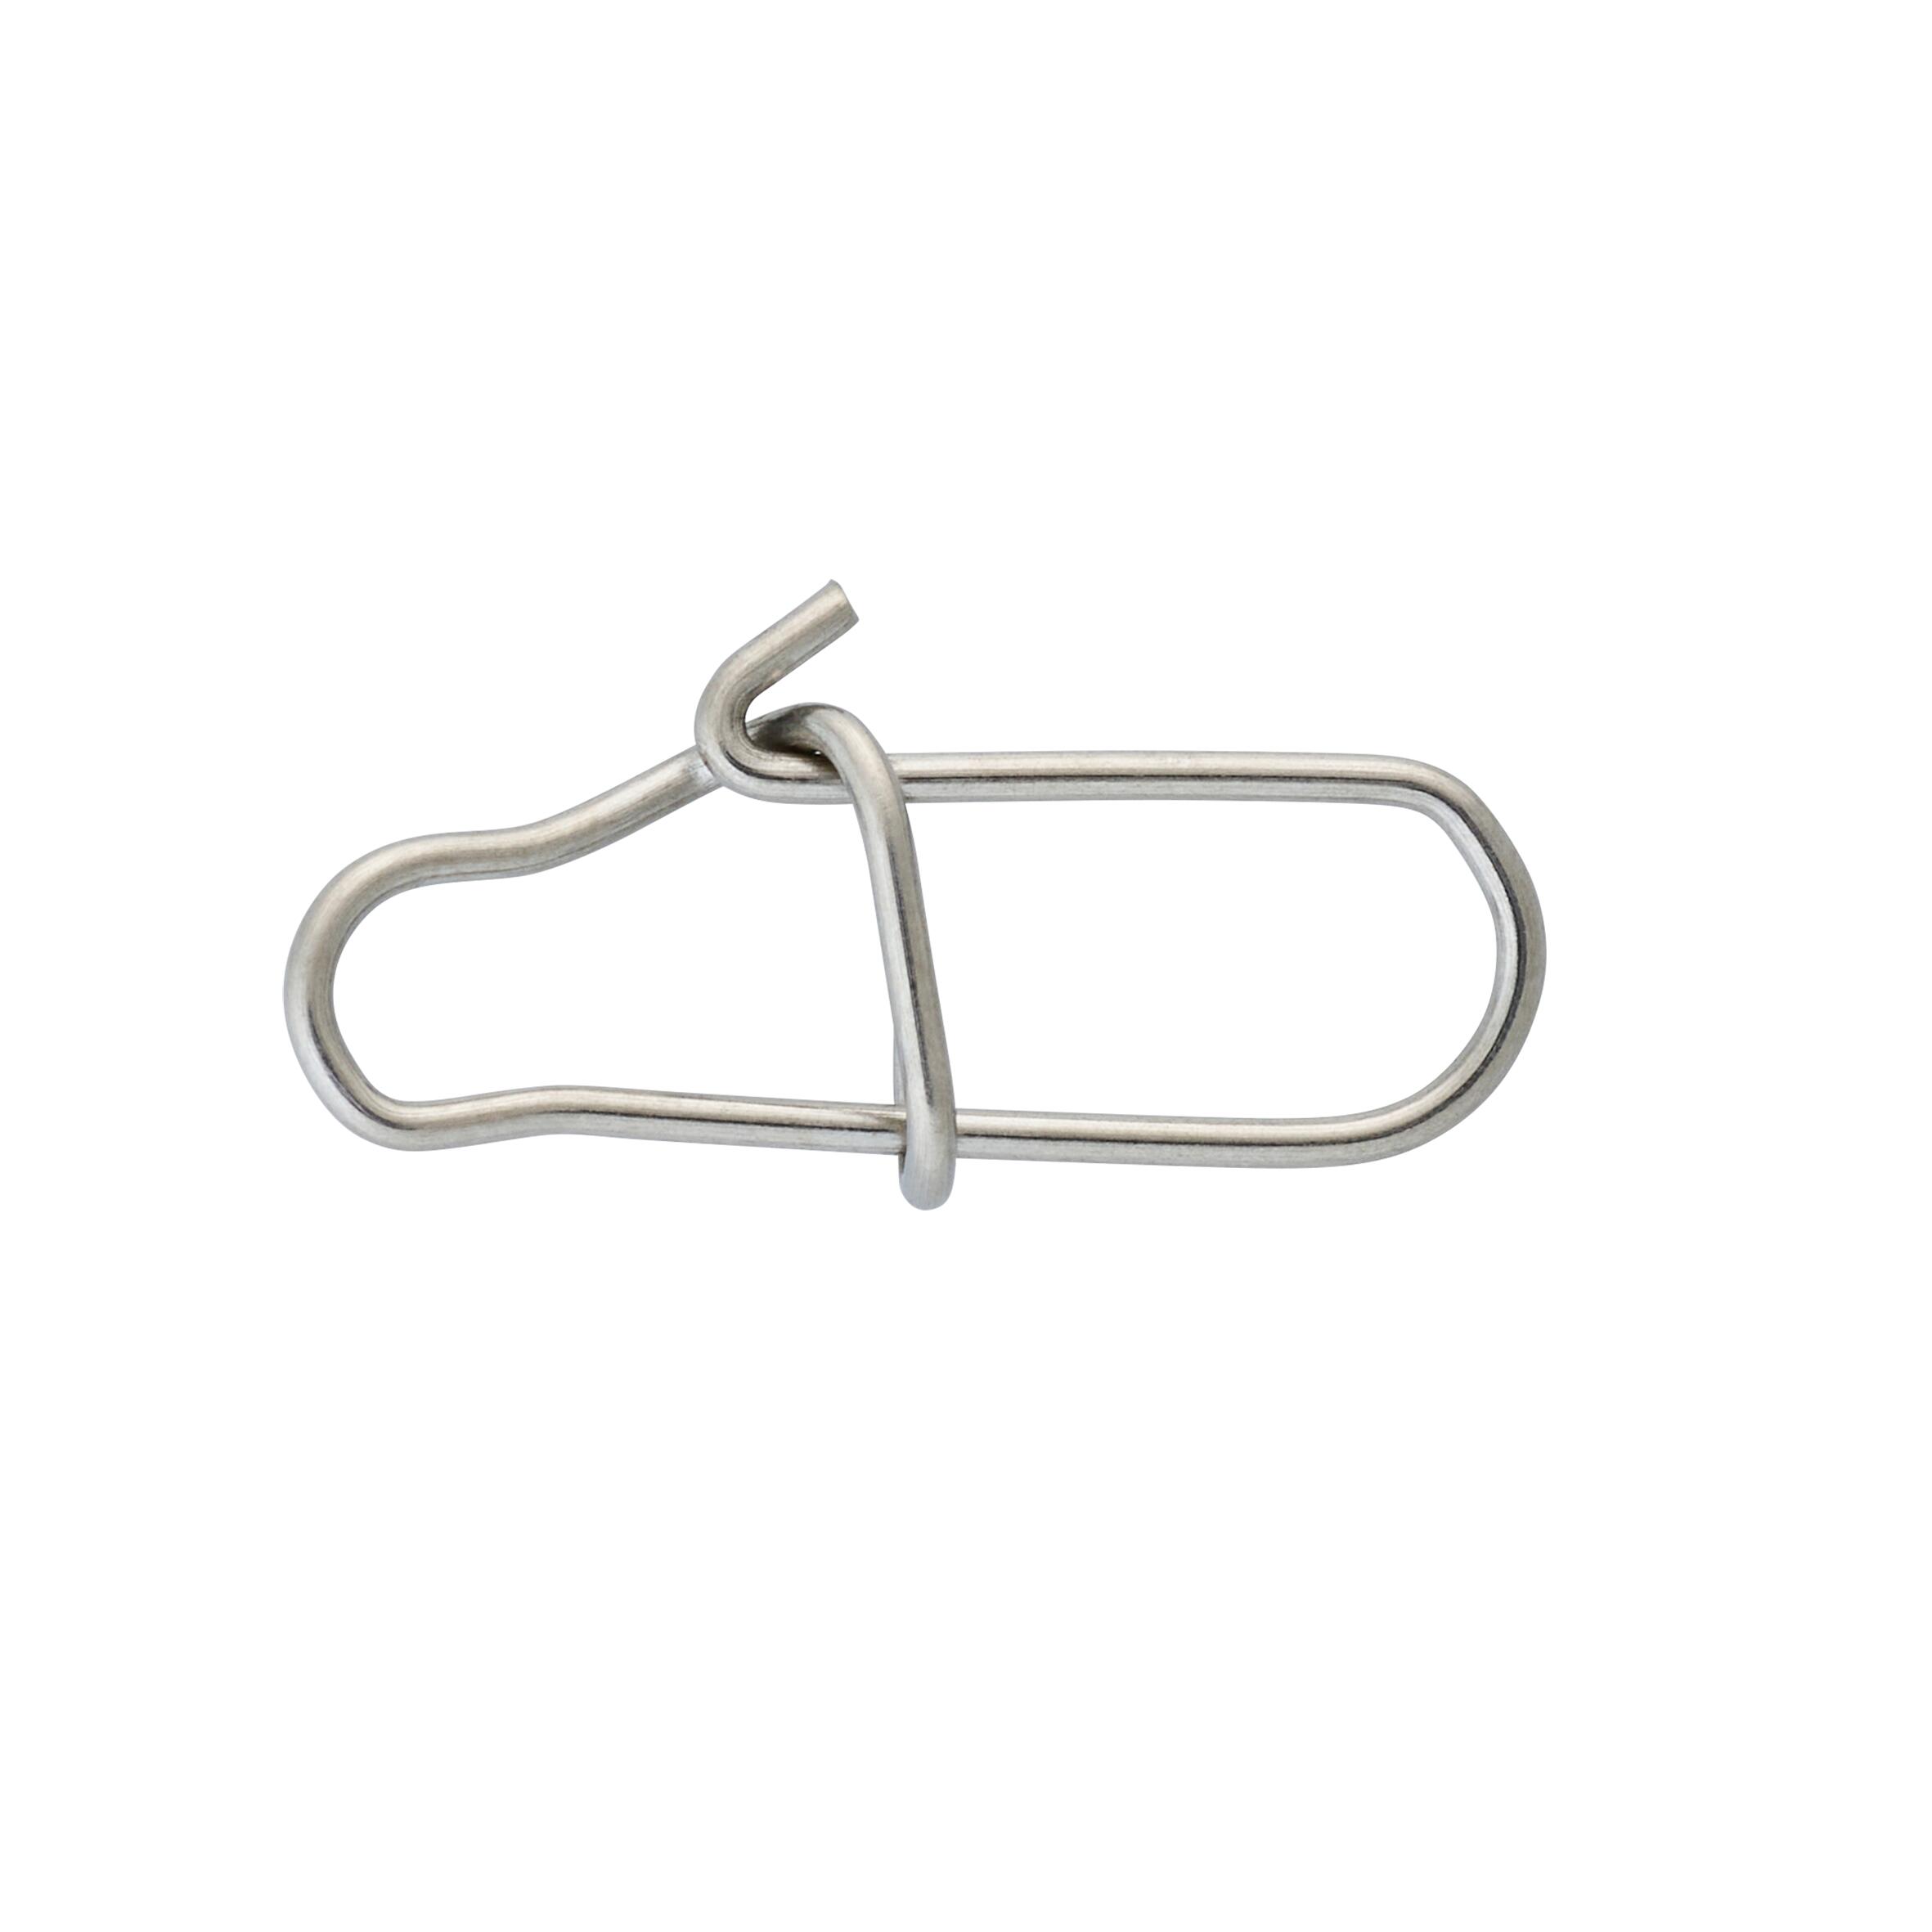 Fishing Stainless Steel Double Snap Clips x10 8/10